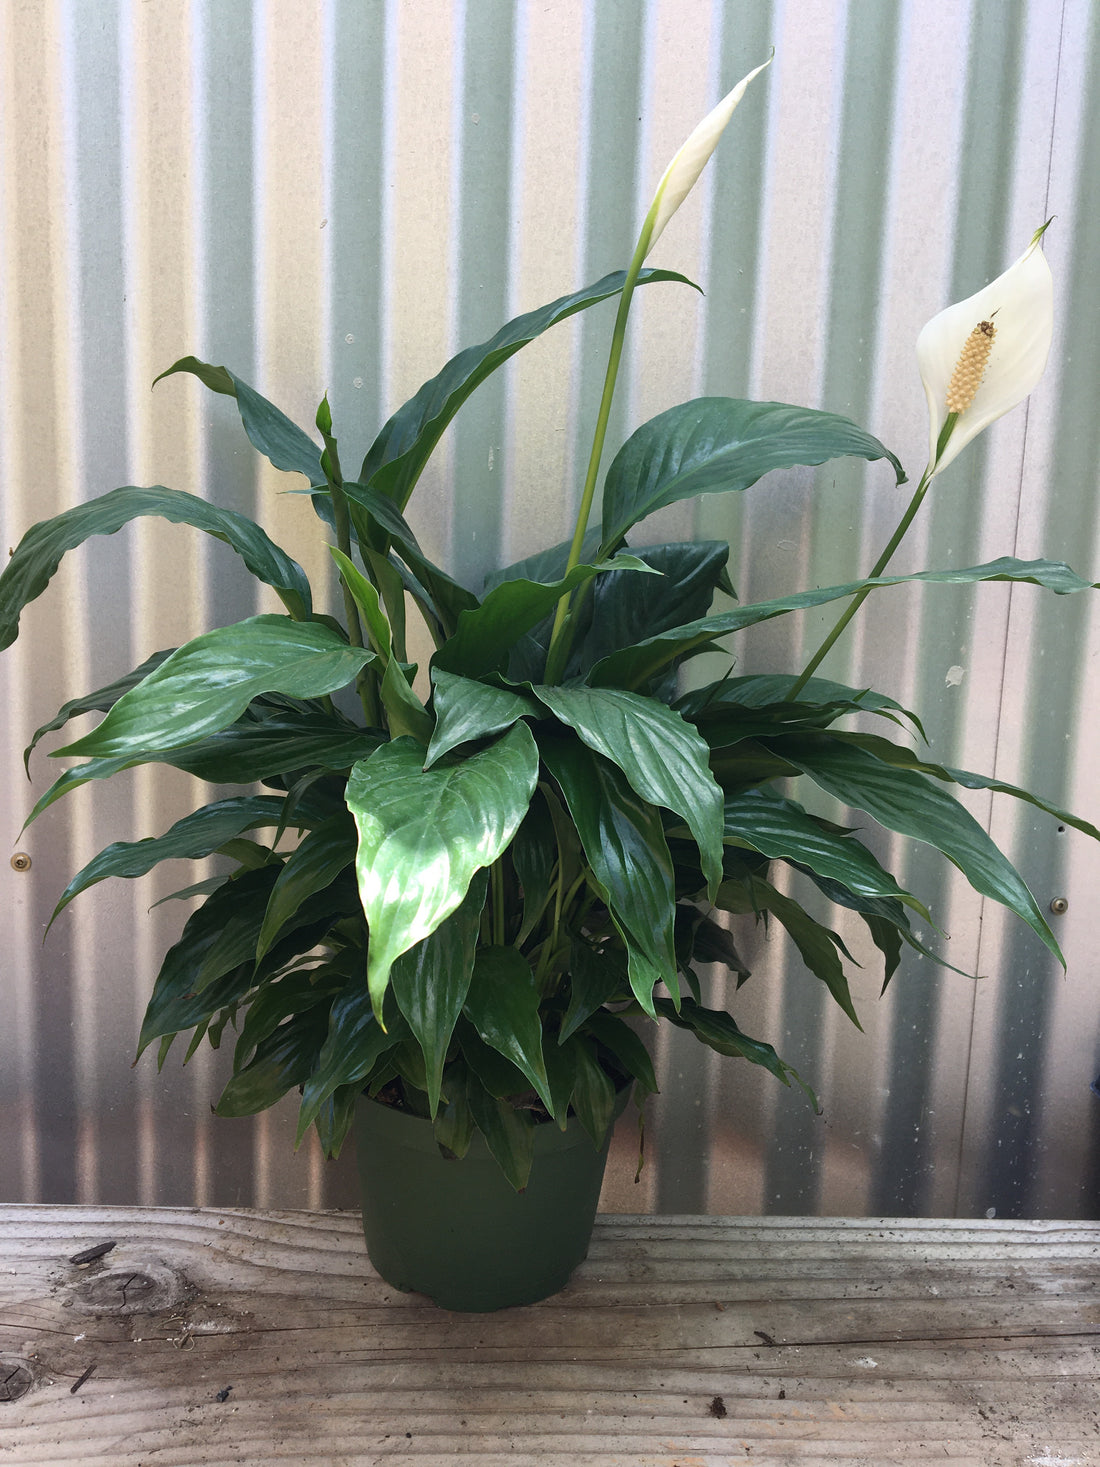 Spathiphyllum (peace lily)